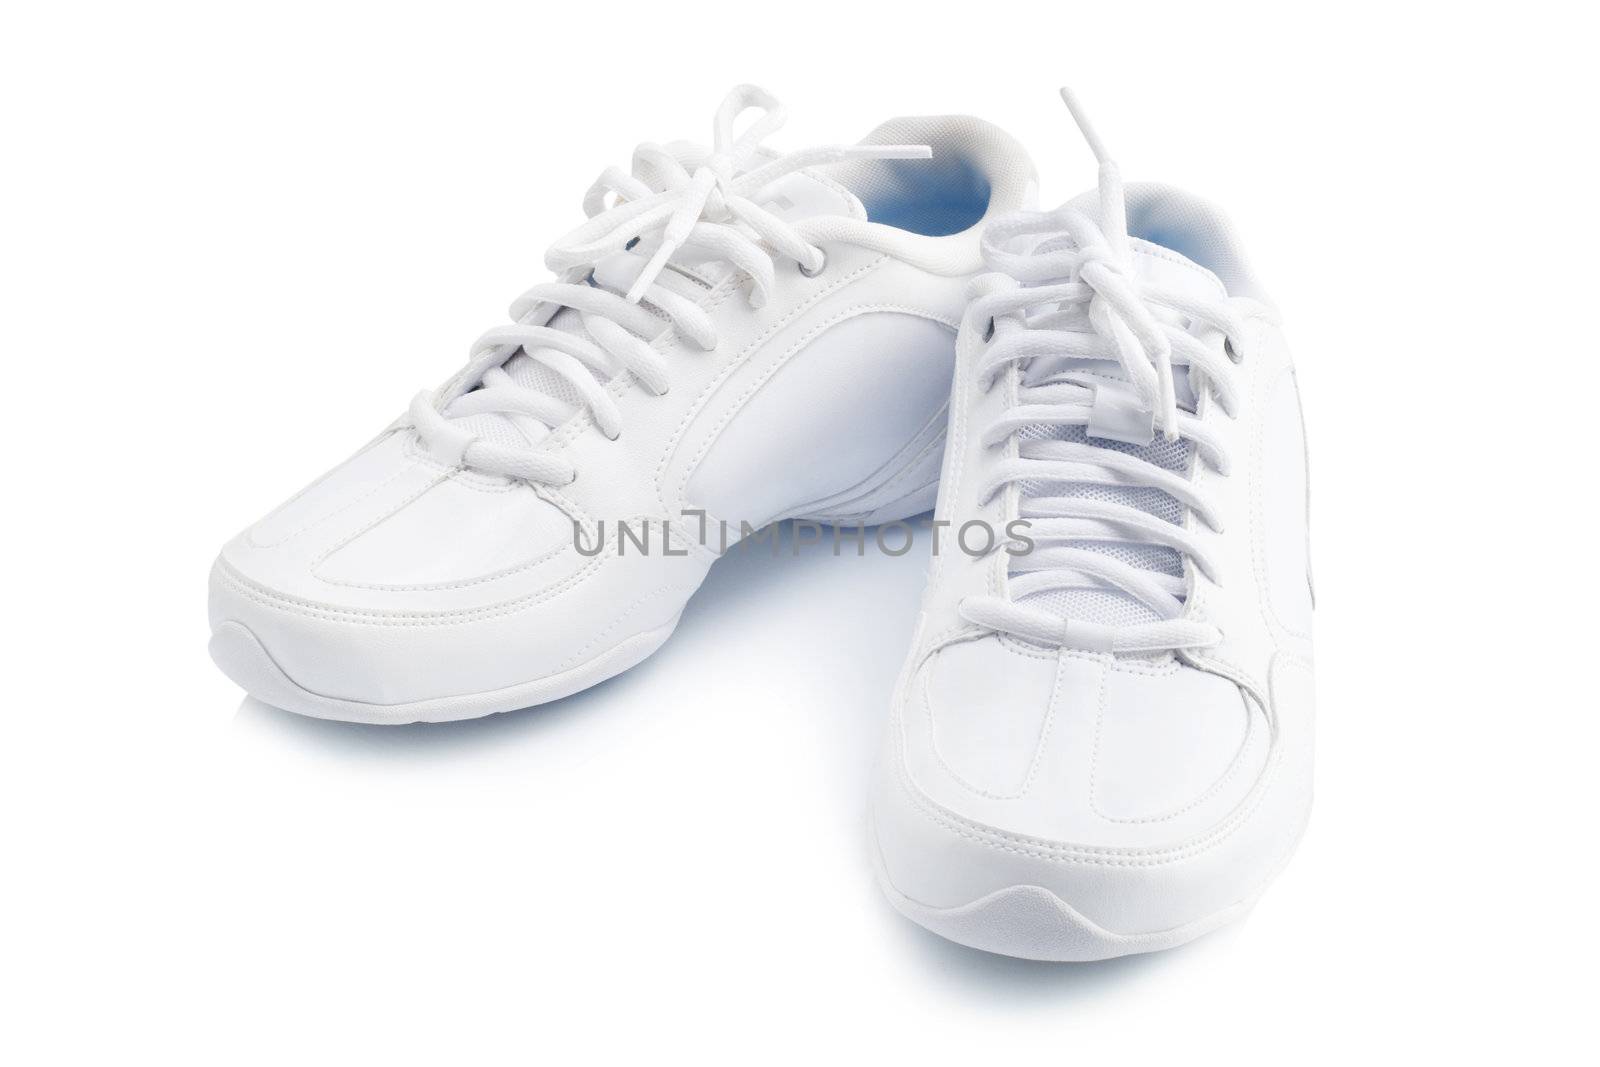 Pair of new sneaker on white background